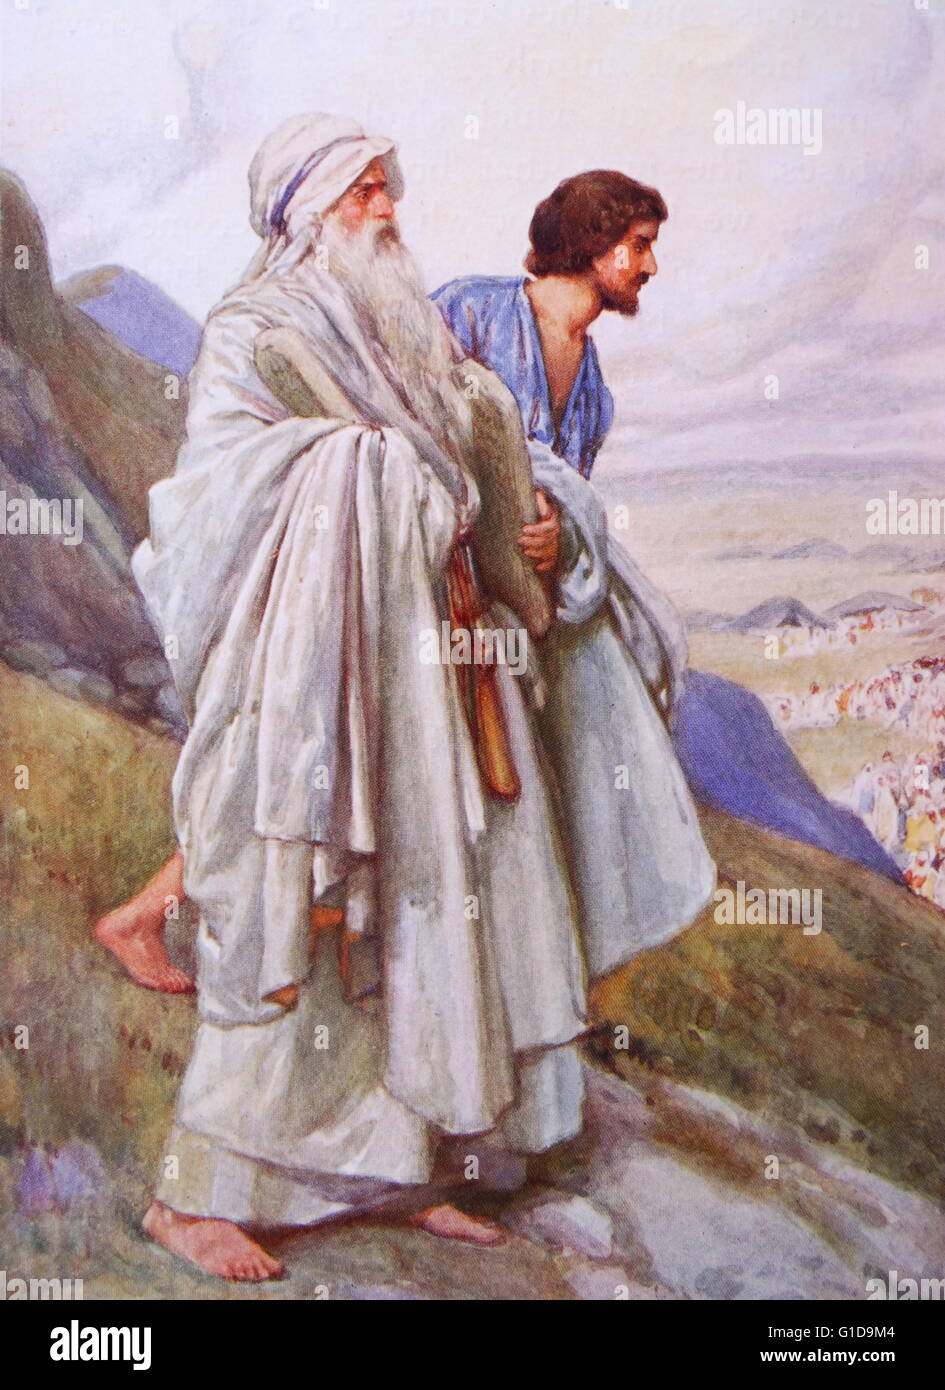 Moses and Joshua descend from Mount Sinai carrying the ten commandments (Old Testament bible story). Stock Photo